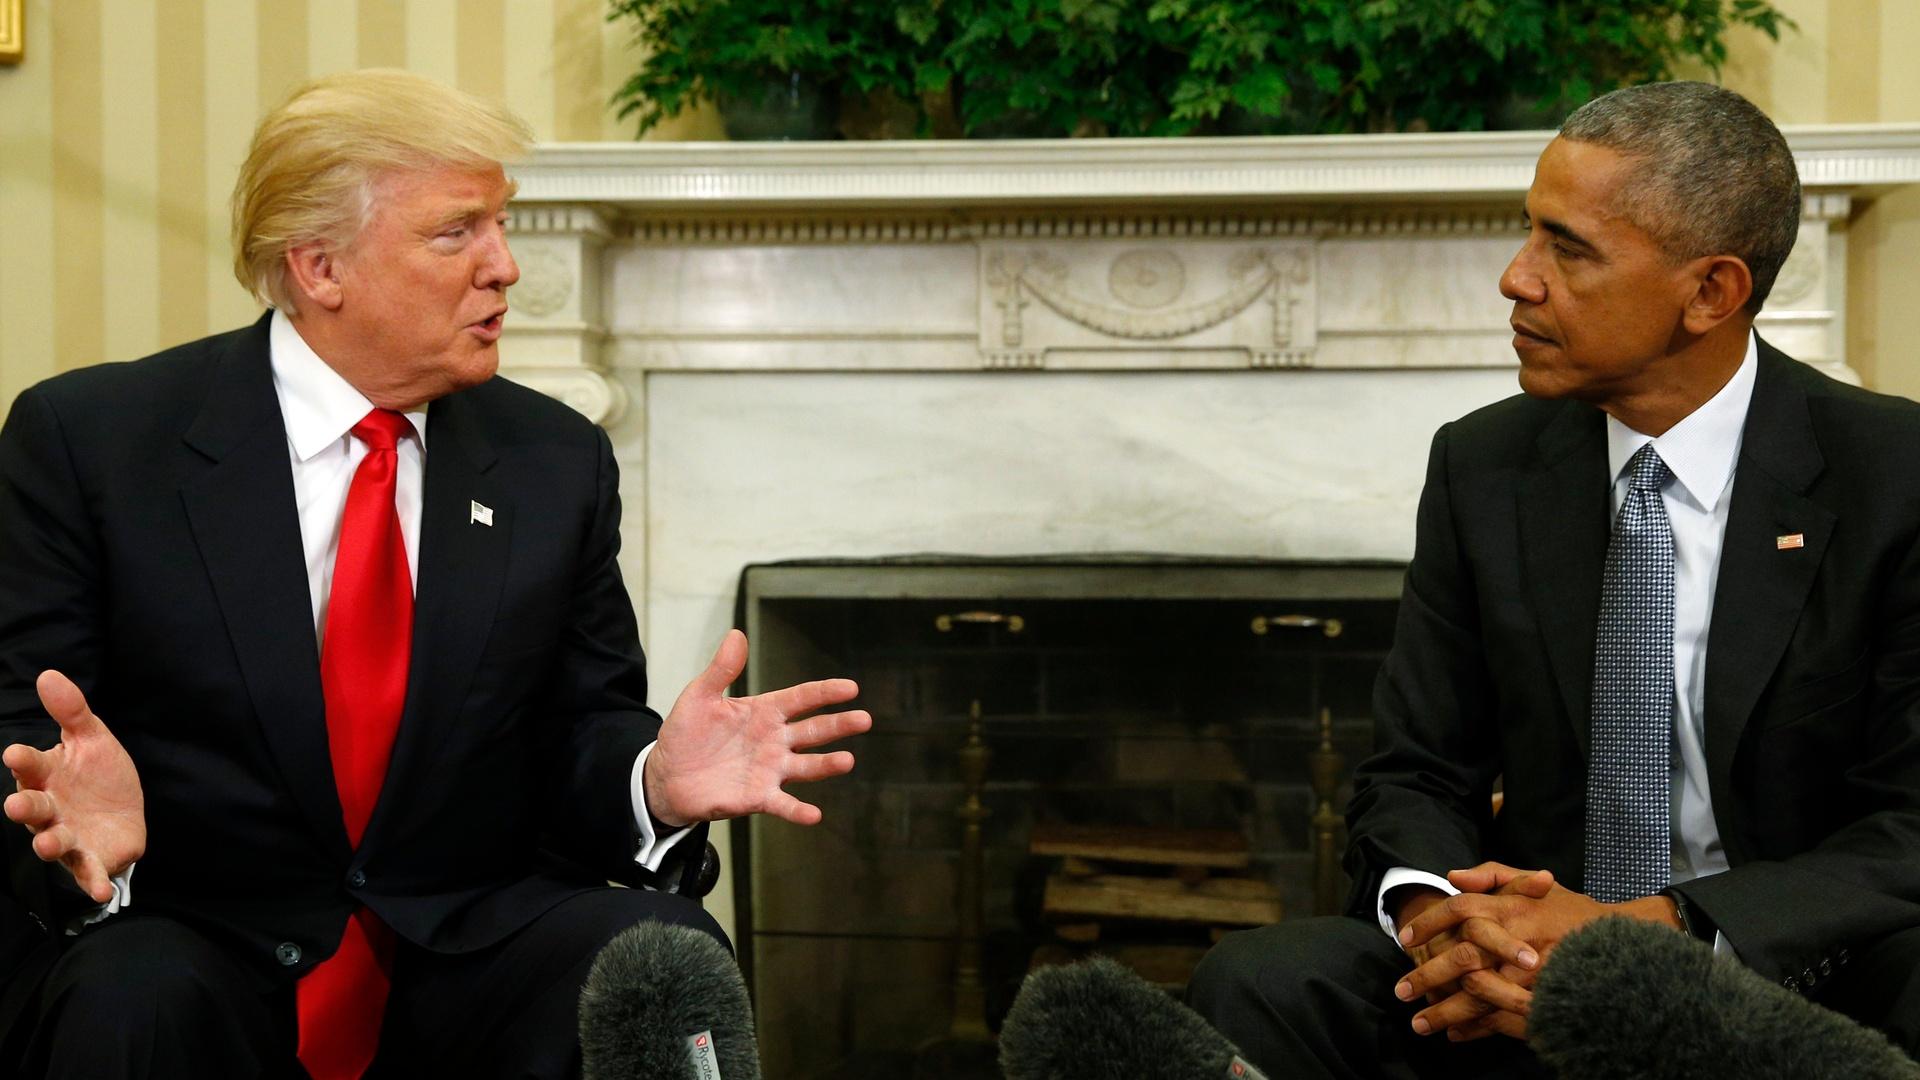 Obama 'encouraged' by first transition meeting with Trump ...